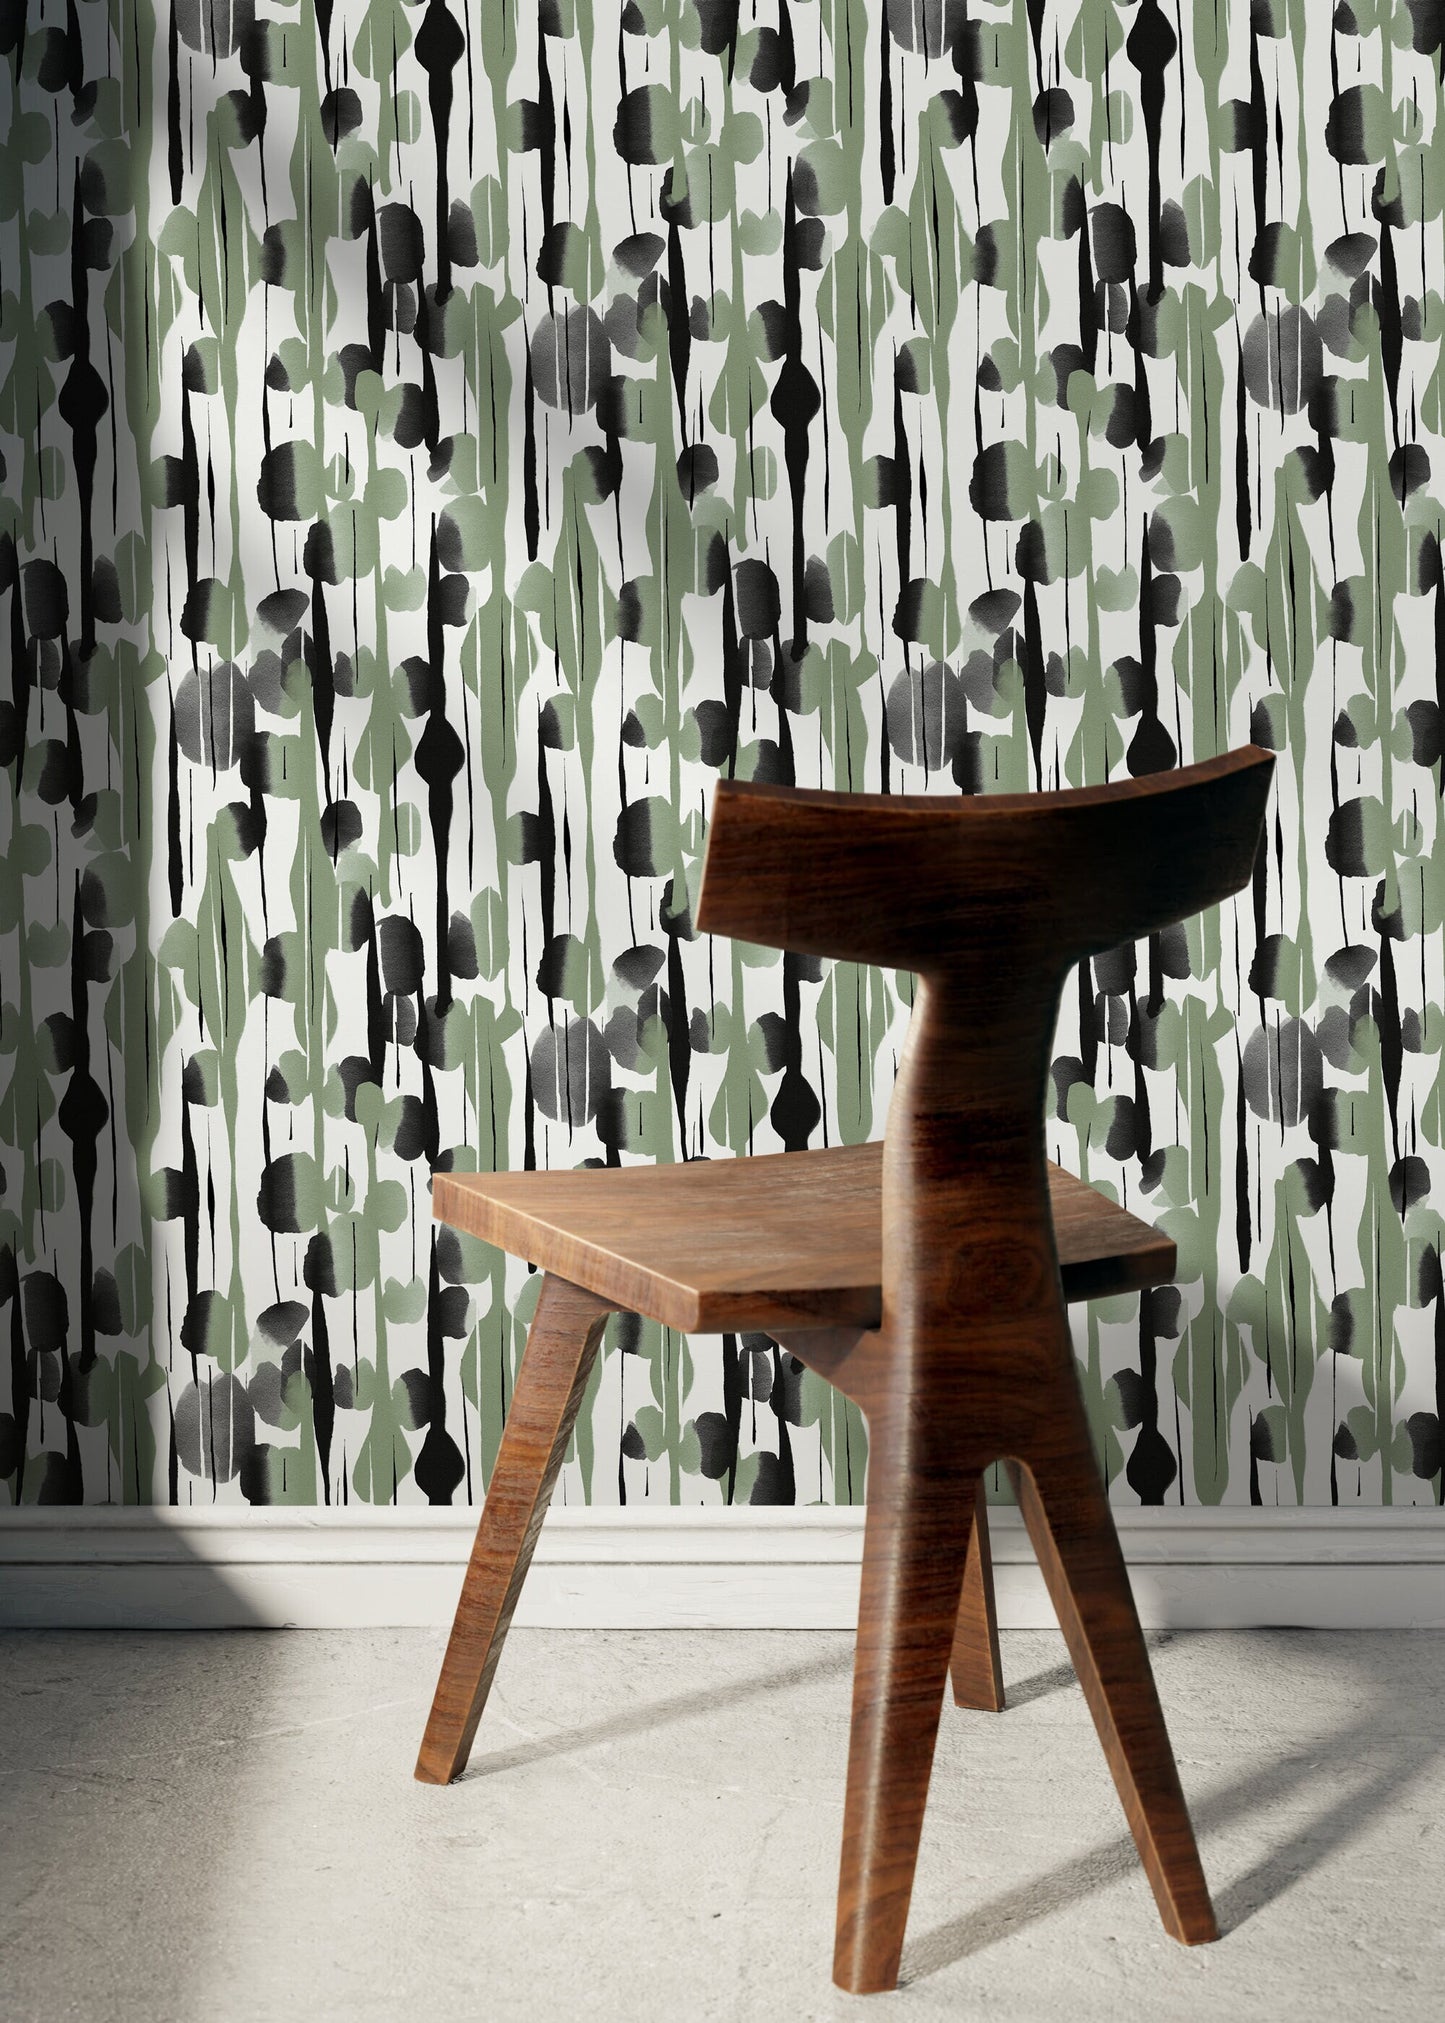 Black and Green Abstract Paint Wallpaper / Peel and Stick Wallpaper Removable Wallpaper Home Decor Wall Art Wall Decor Room Decor - D537